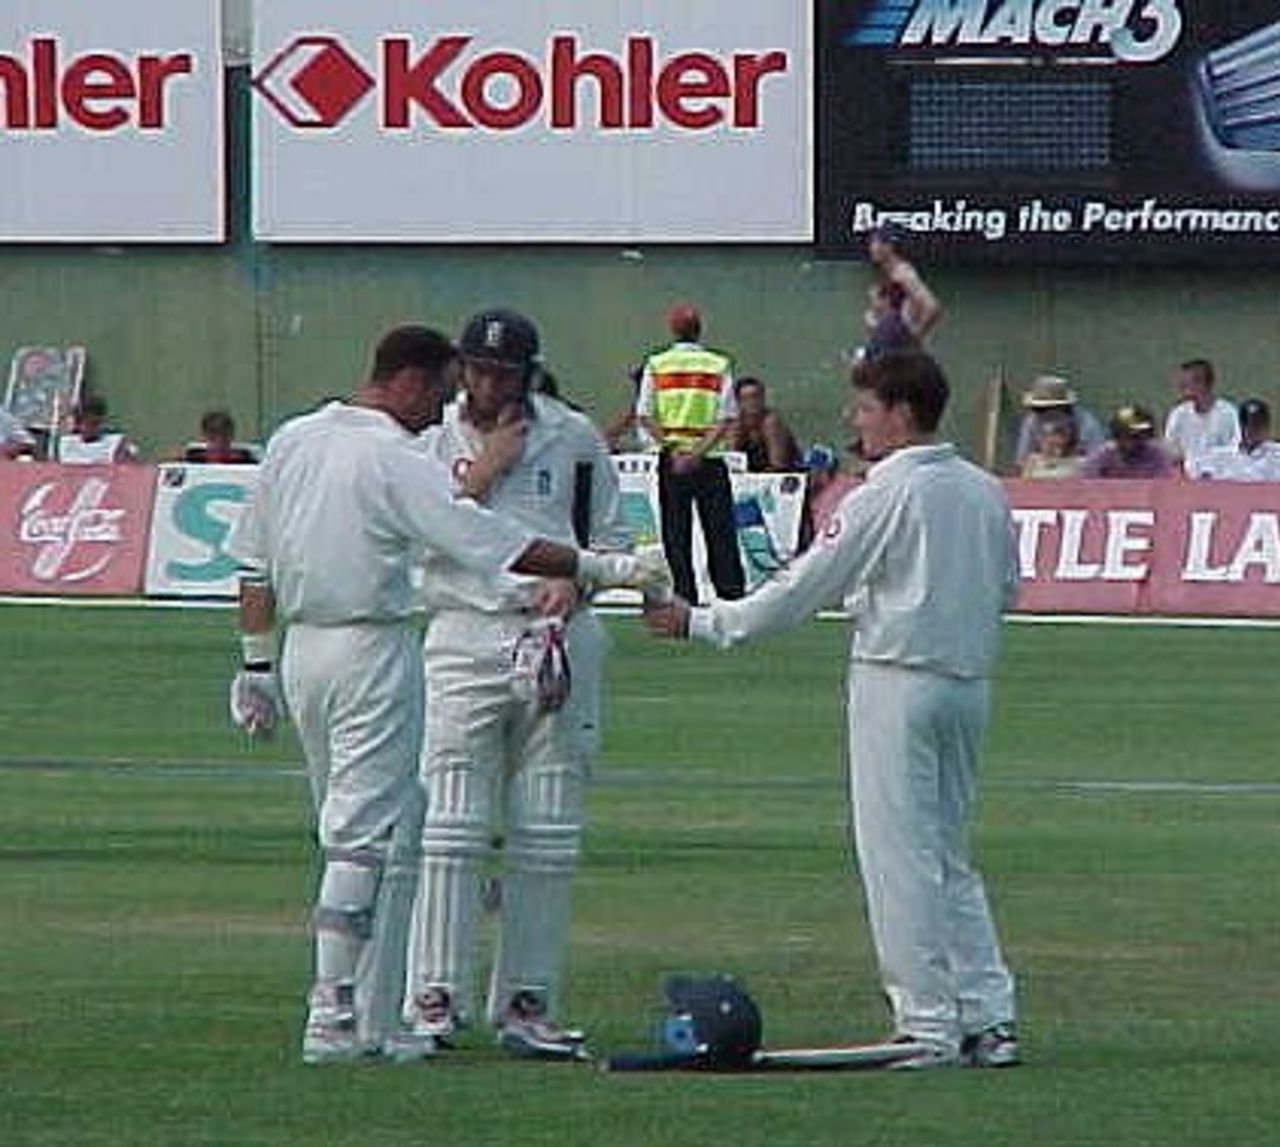 England's batsmen, Nasser Hussain and Mike Atherton, take a well earned drinks break during the evening session of the 2nd day of the Port Elizabeth Test match. (10 December 1999)